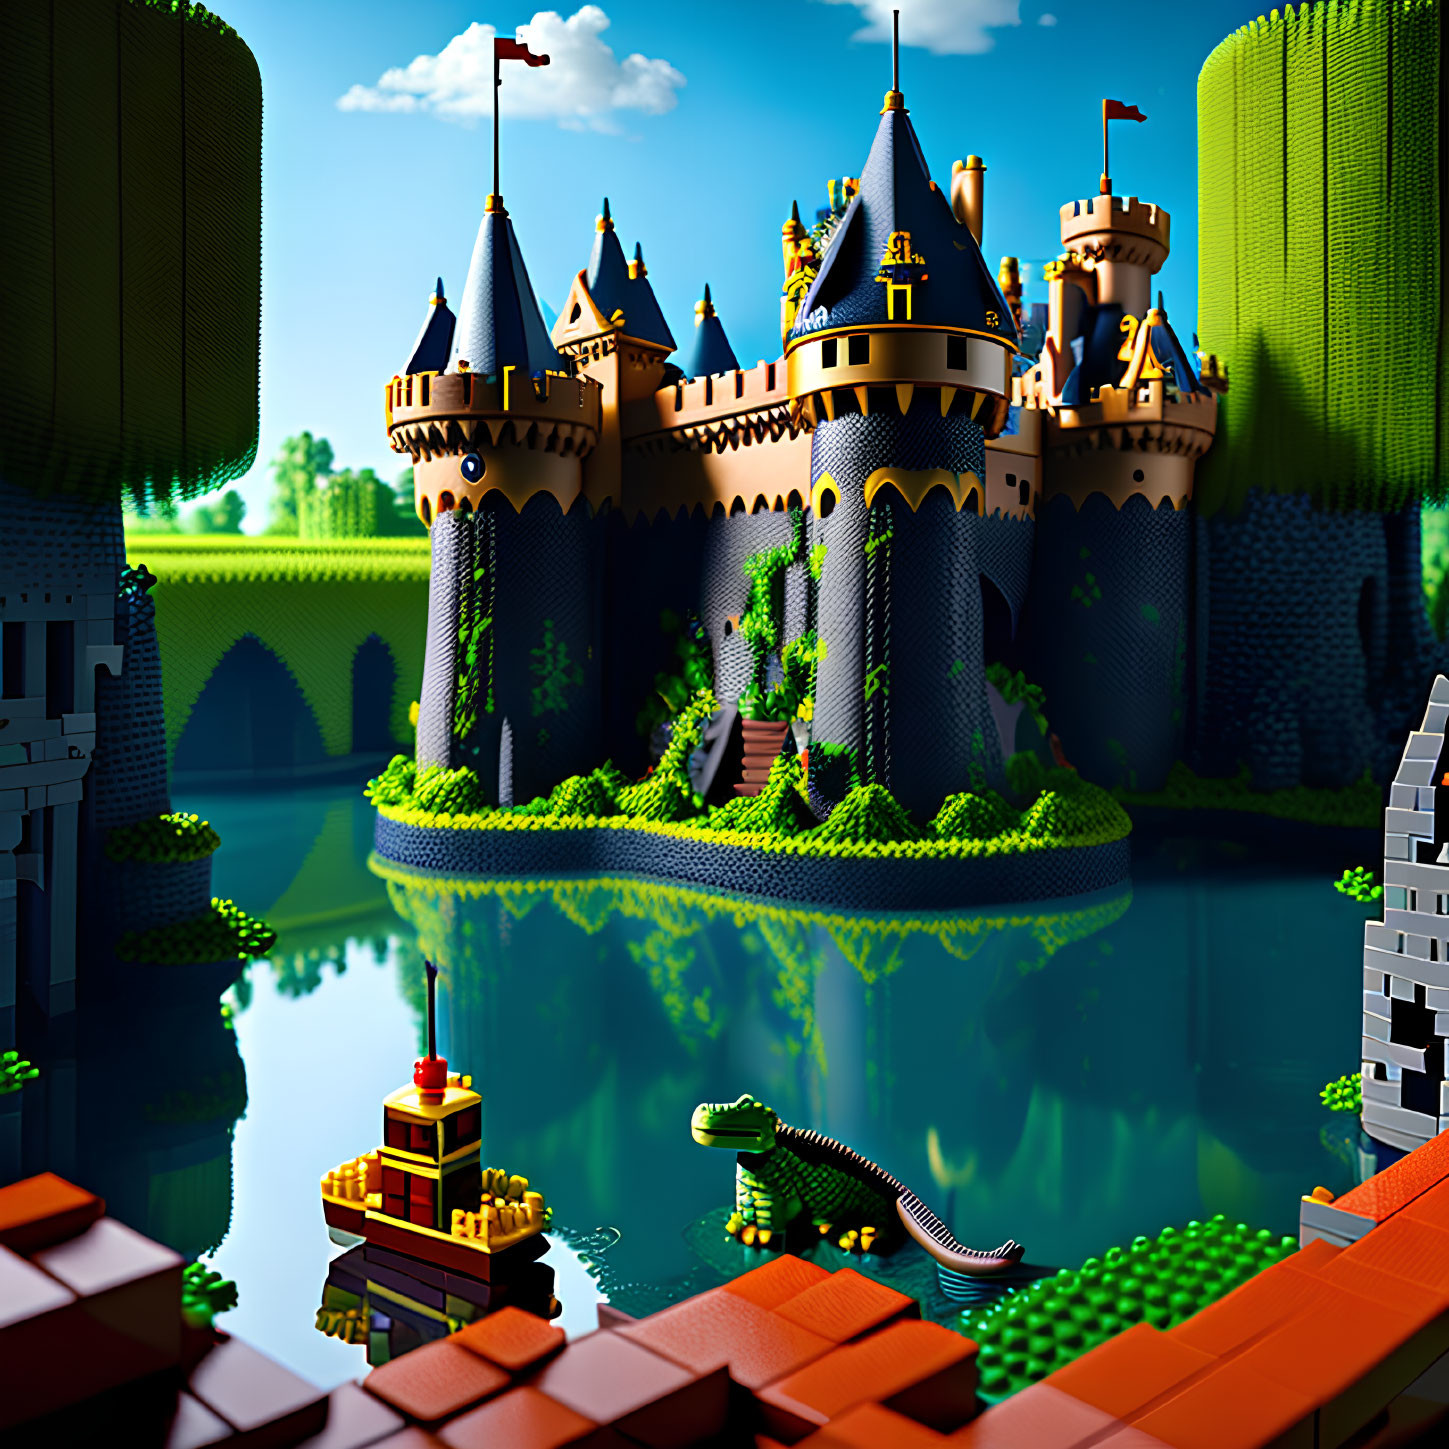 Toy brick-built castle with turrets, crocodile, boat, water, blue sky, and green